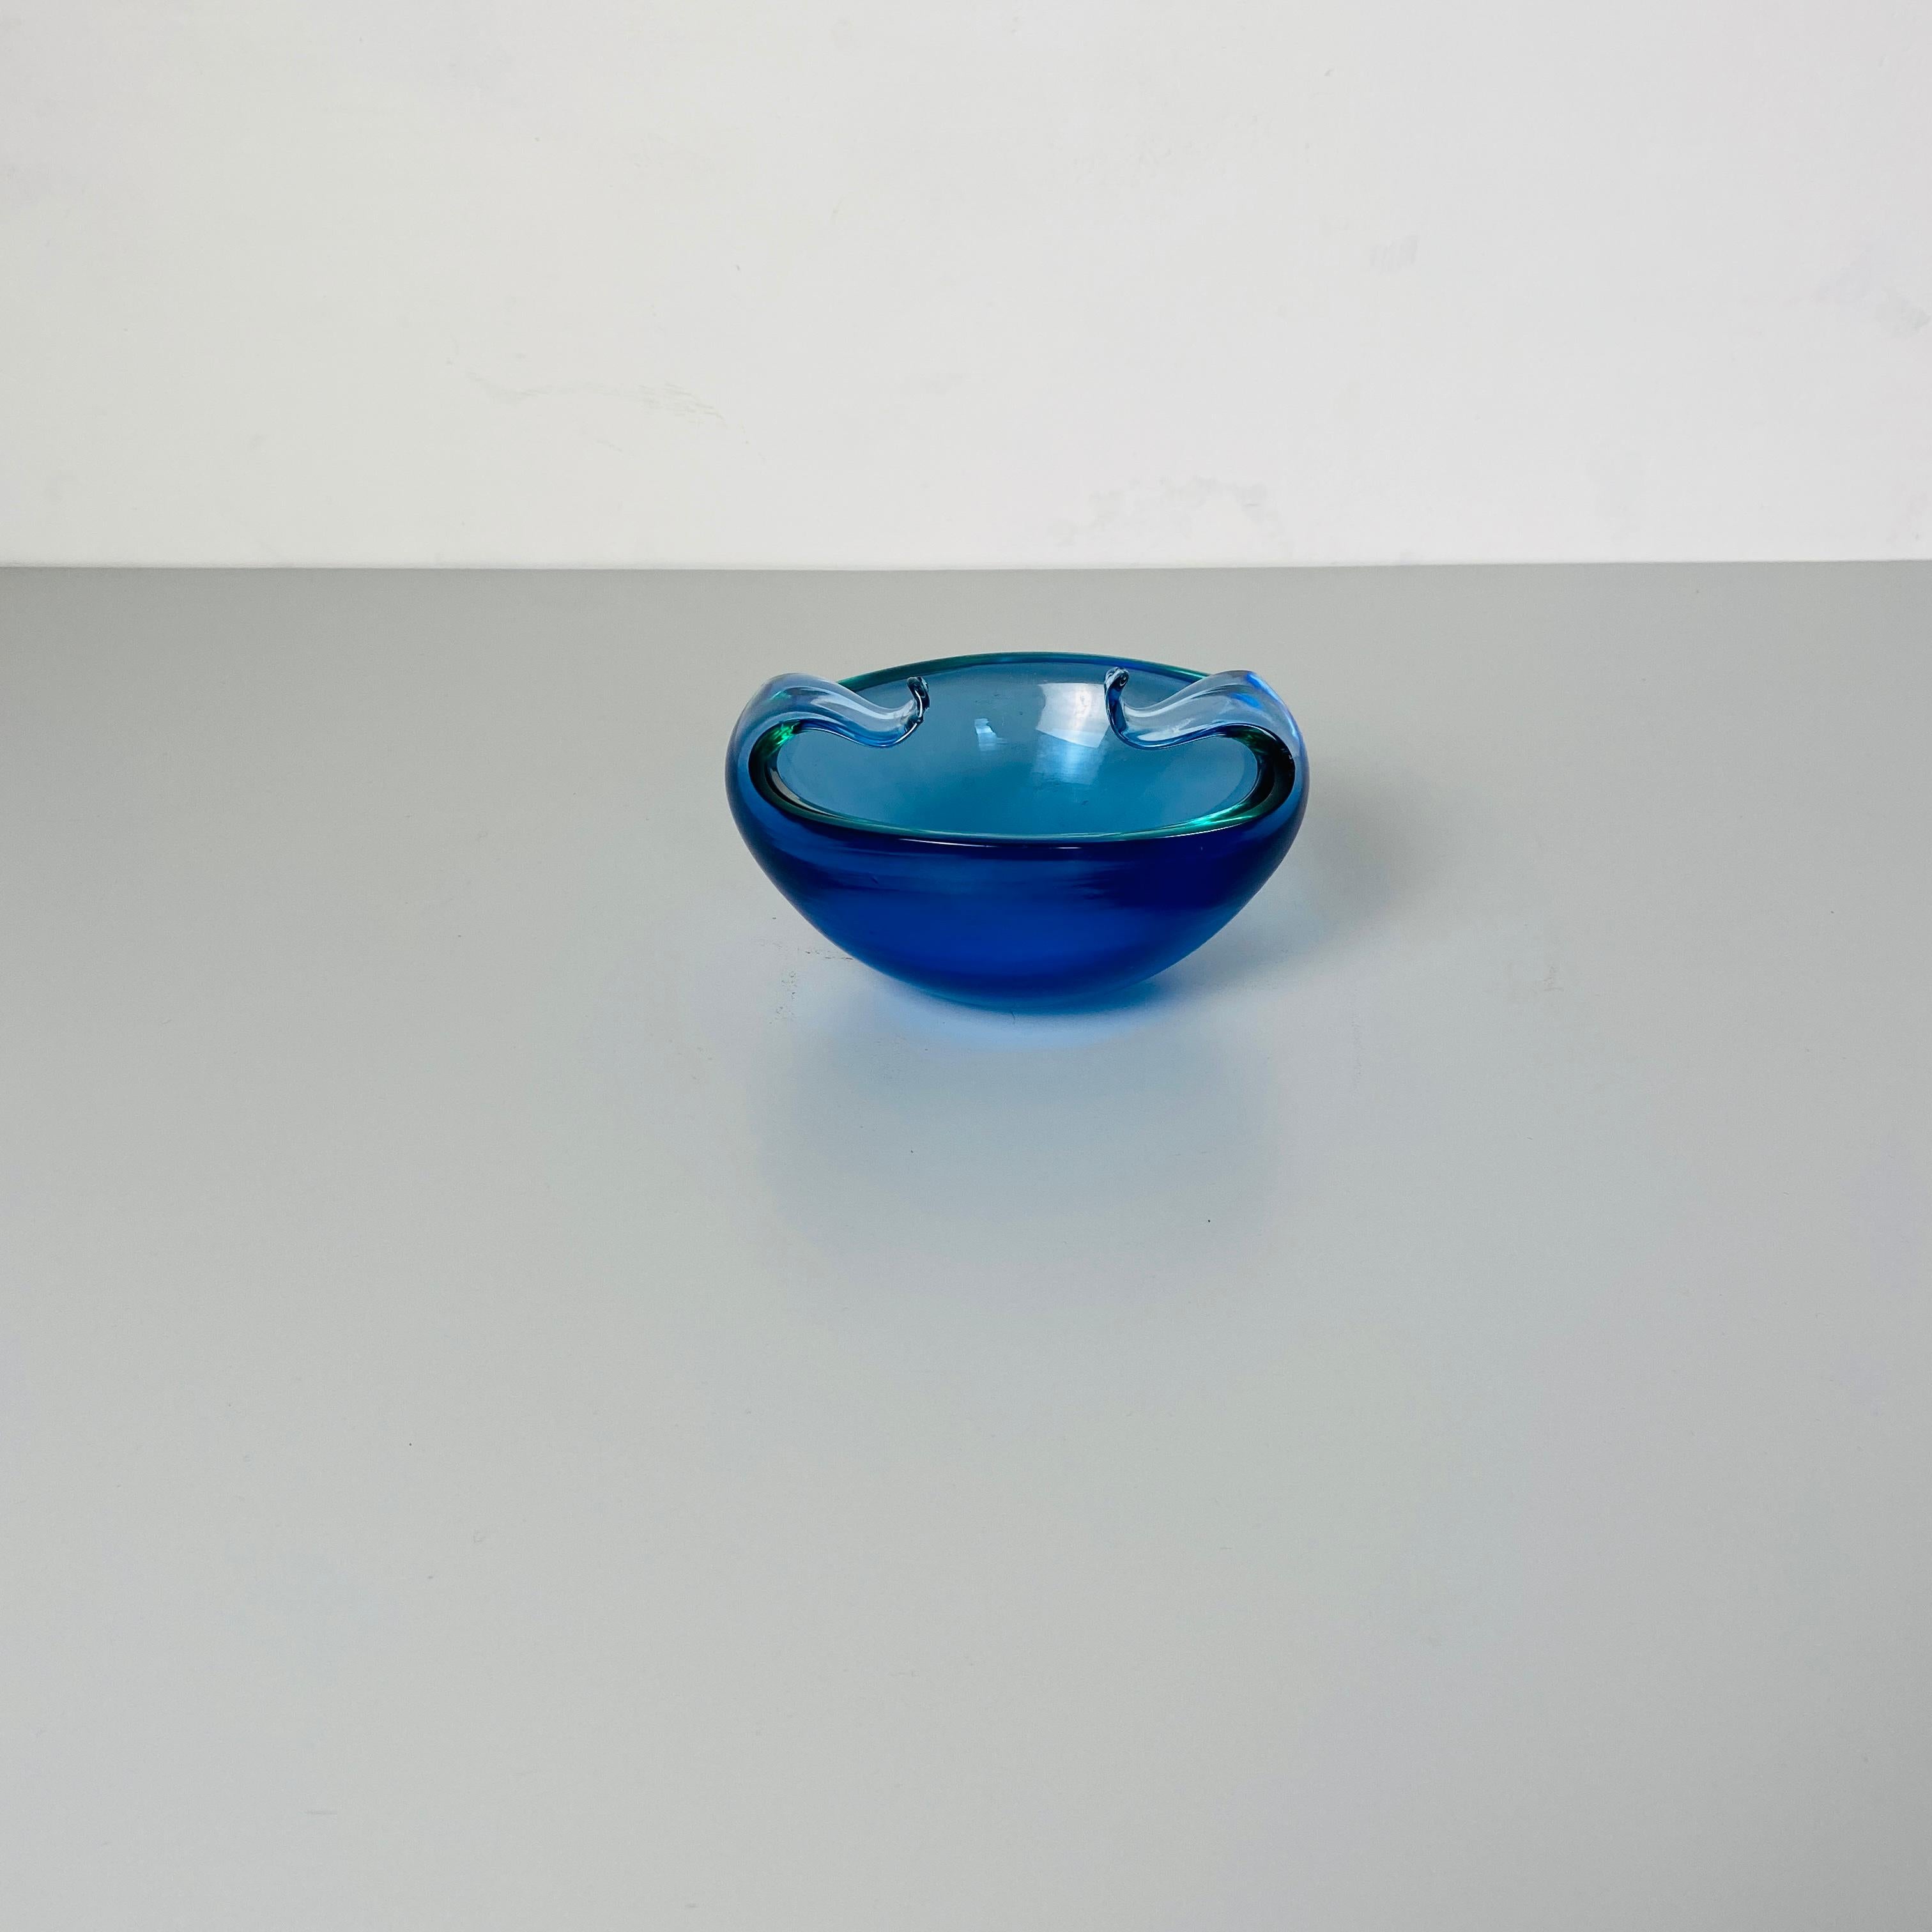 Italian Mid-Century Modern Murano Glass Object Holder with Curled Arms, 1970s For Sale 3